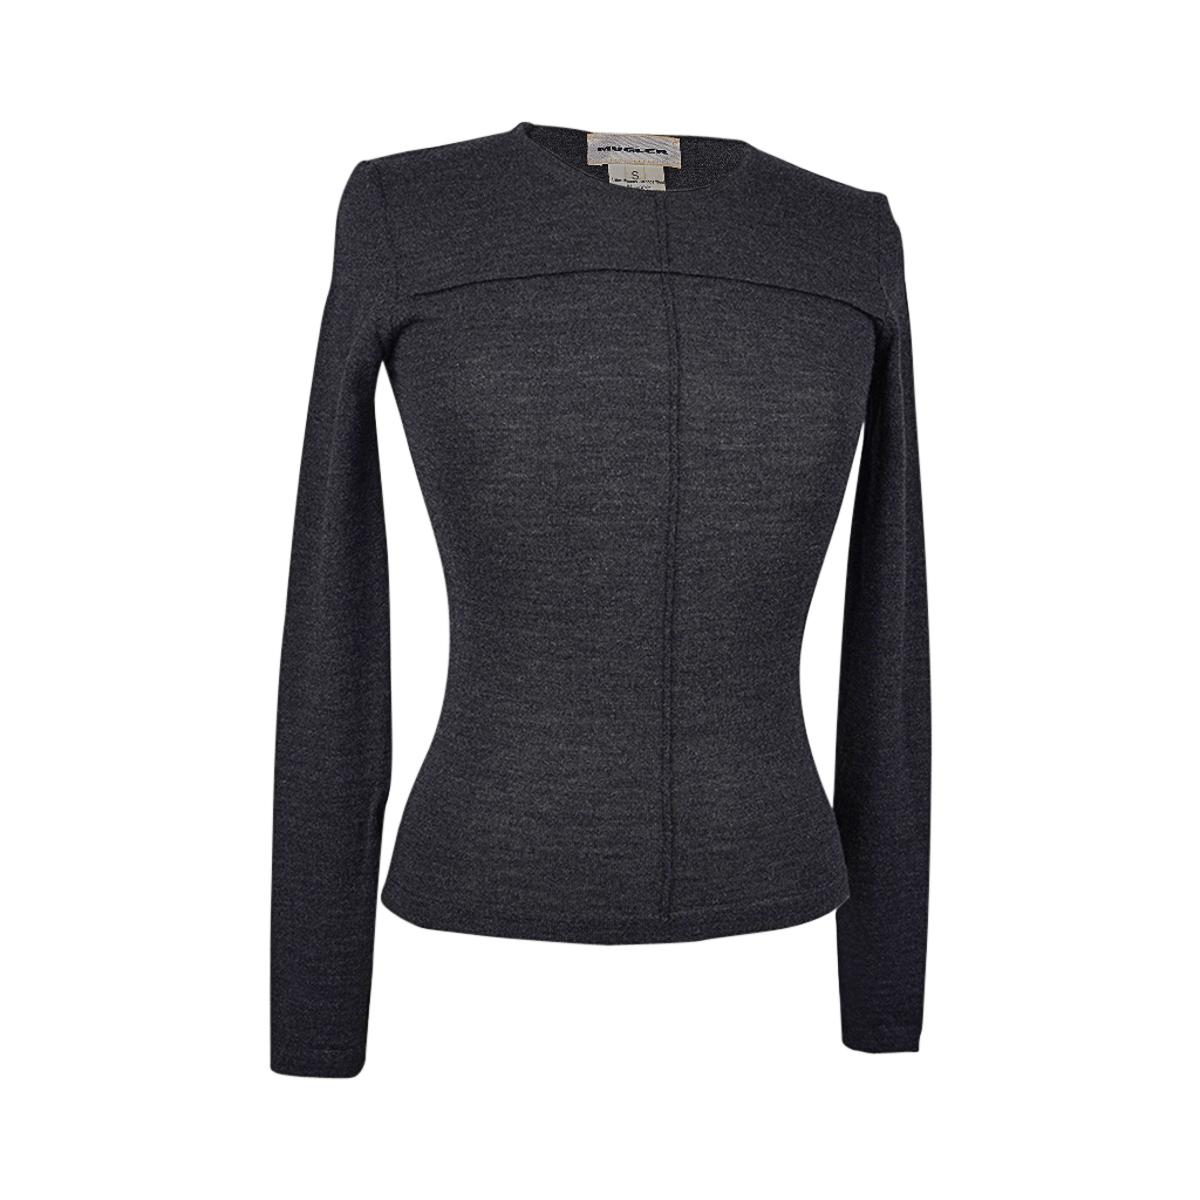 Mugler Vintage Charcoal Gray Knit Top Classic S 4